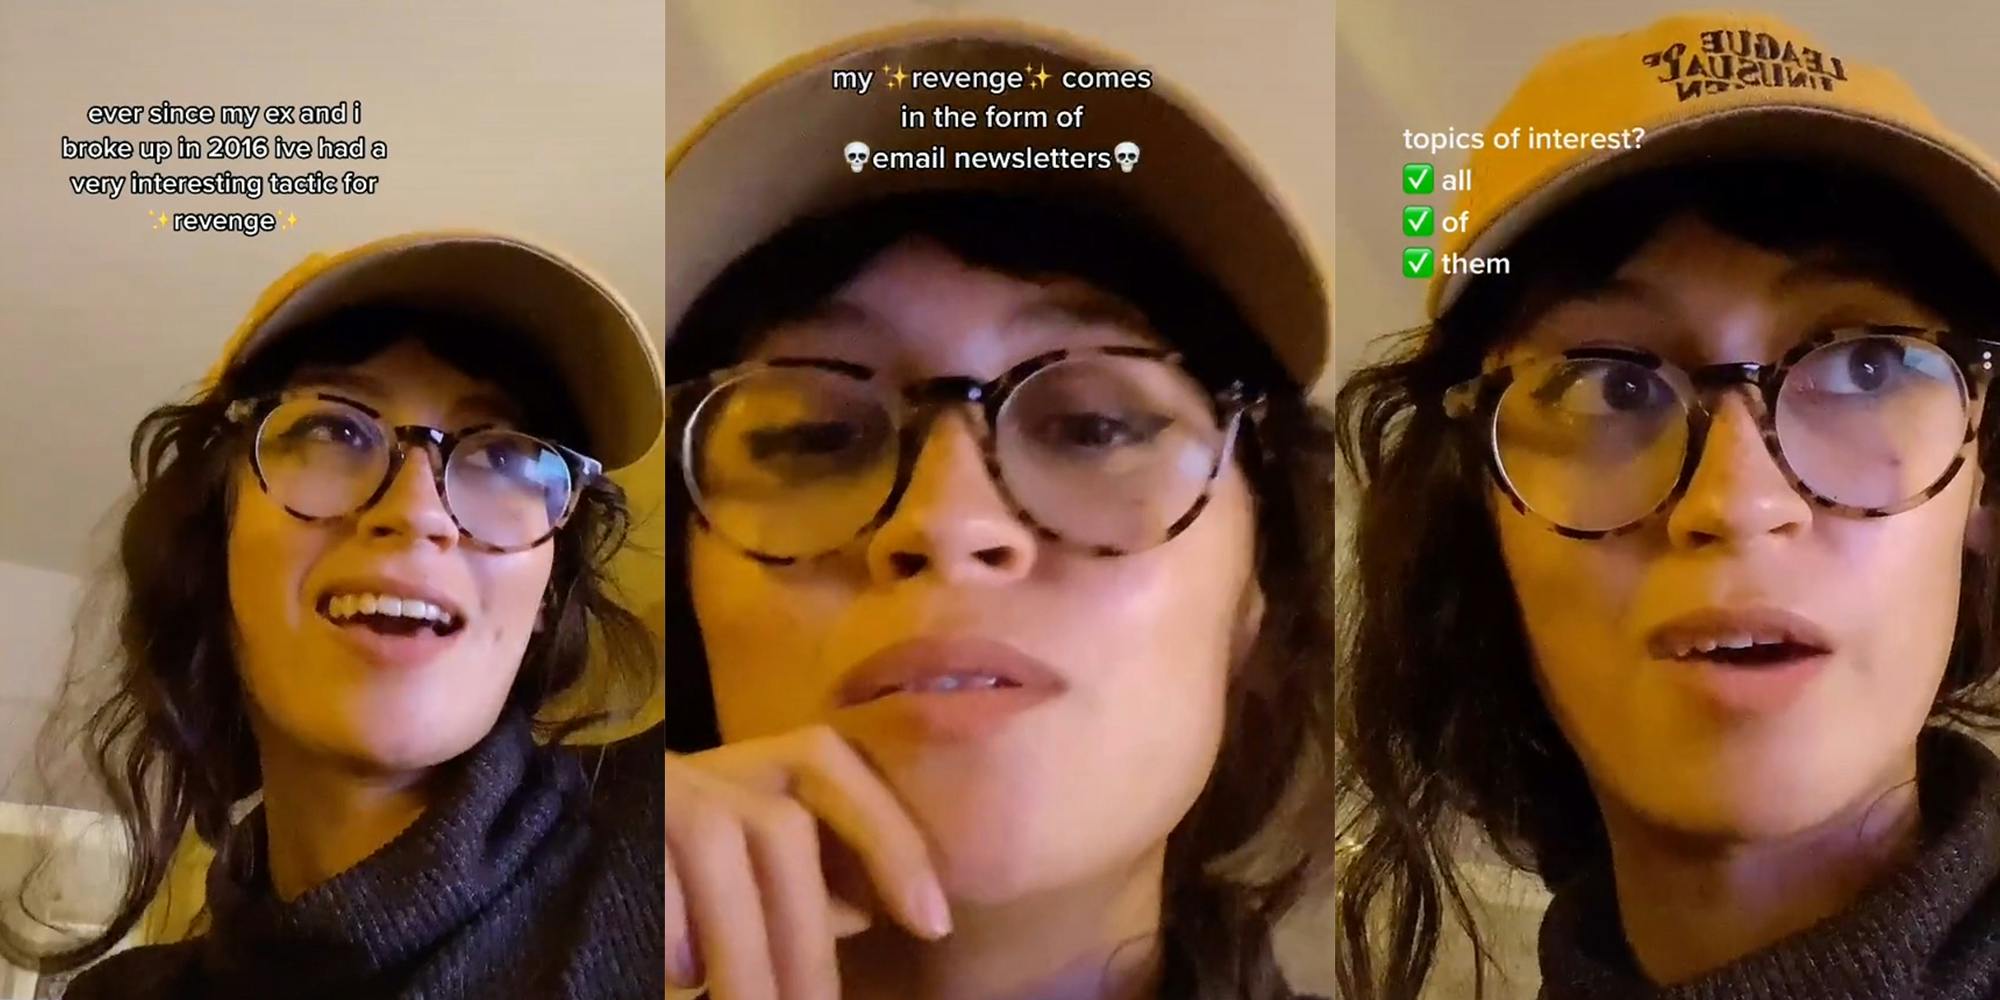 woman in hat and glasses with caption "ever since my ex and I broke up in 2016 i've had a very interesting tactic for revenge" (l) "my revenge comes in the form of email newsletters" (c) "topics of interest? all of them" (r)